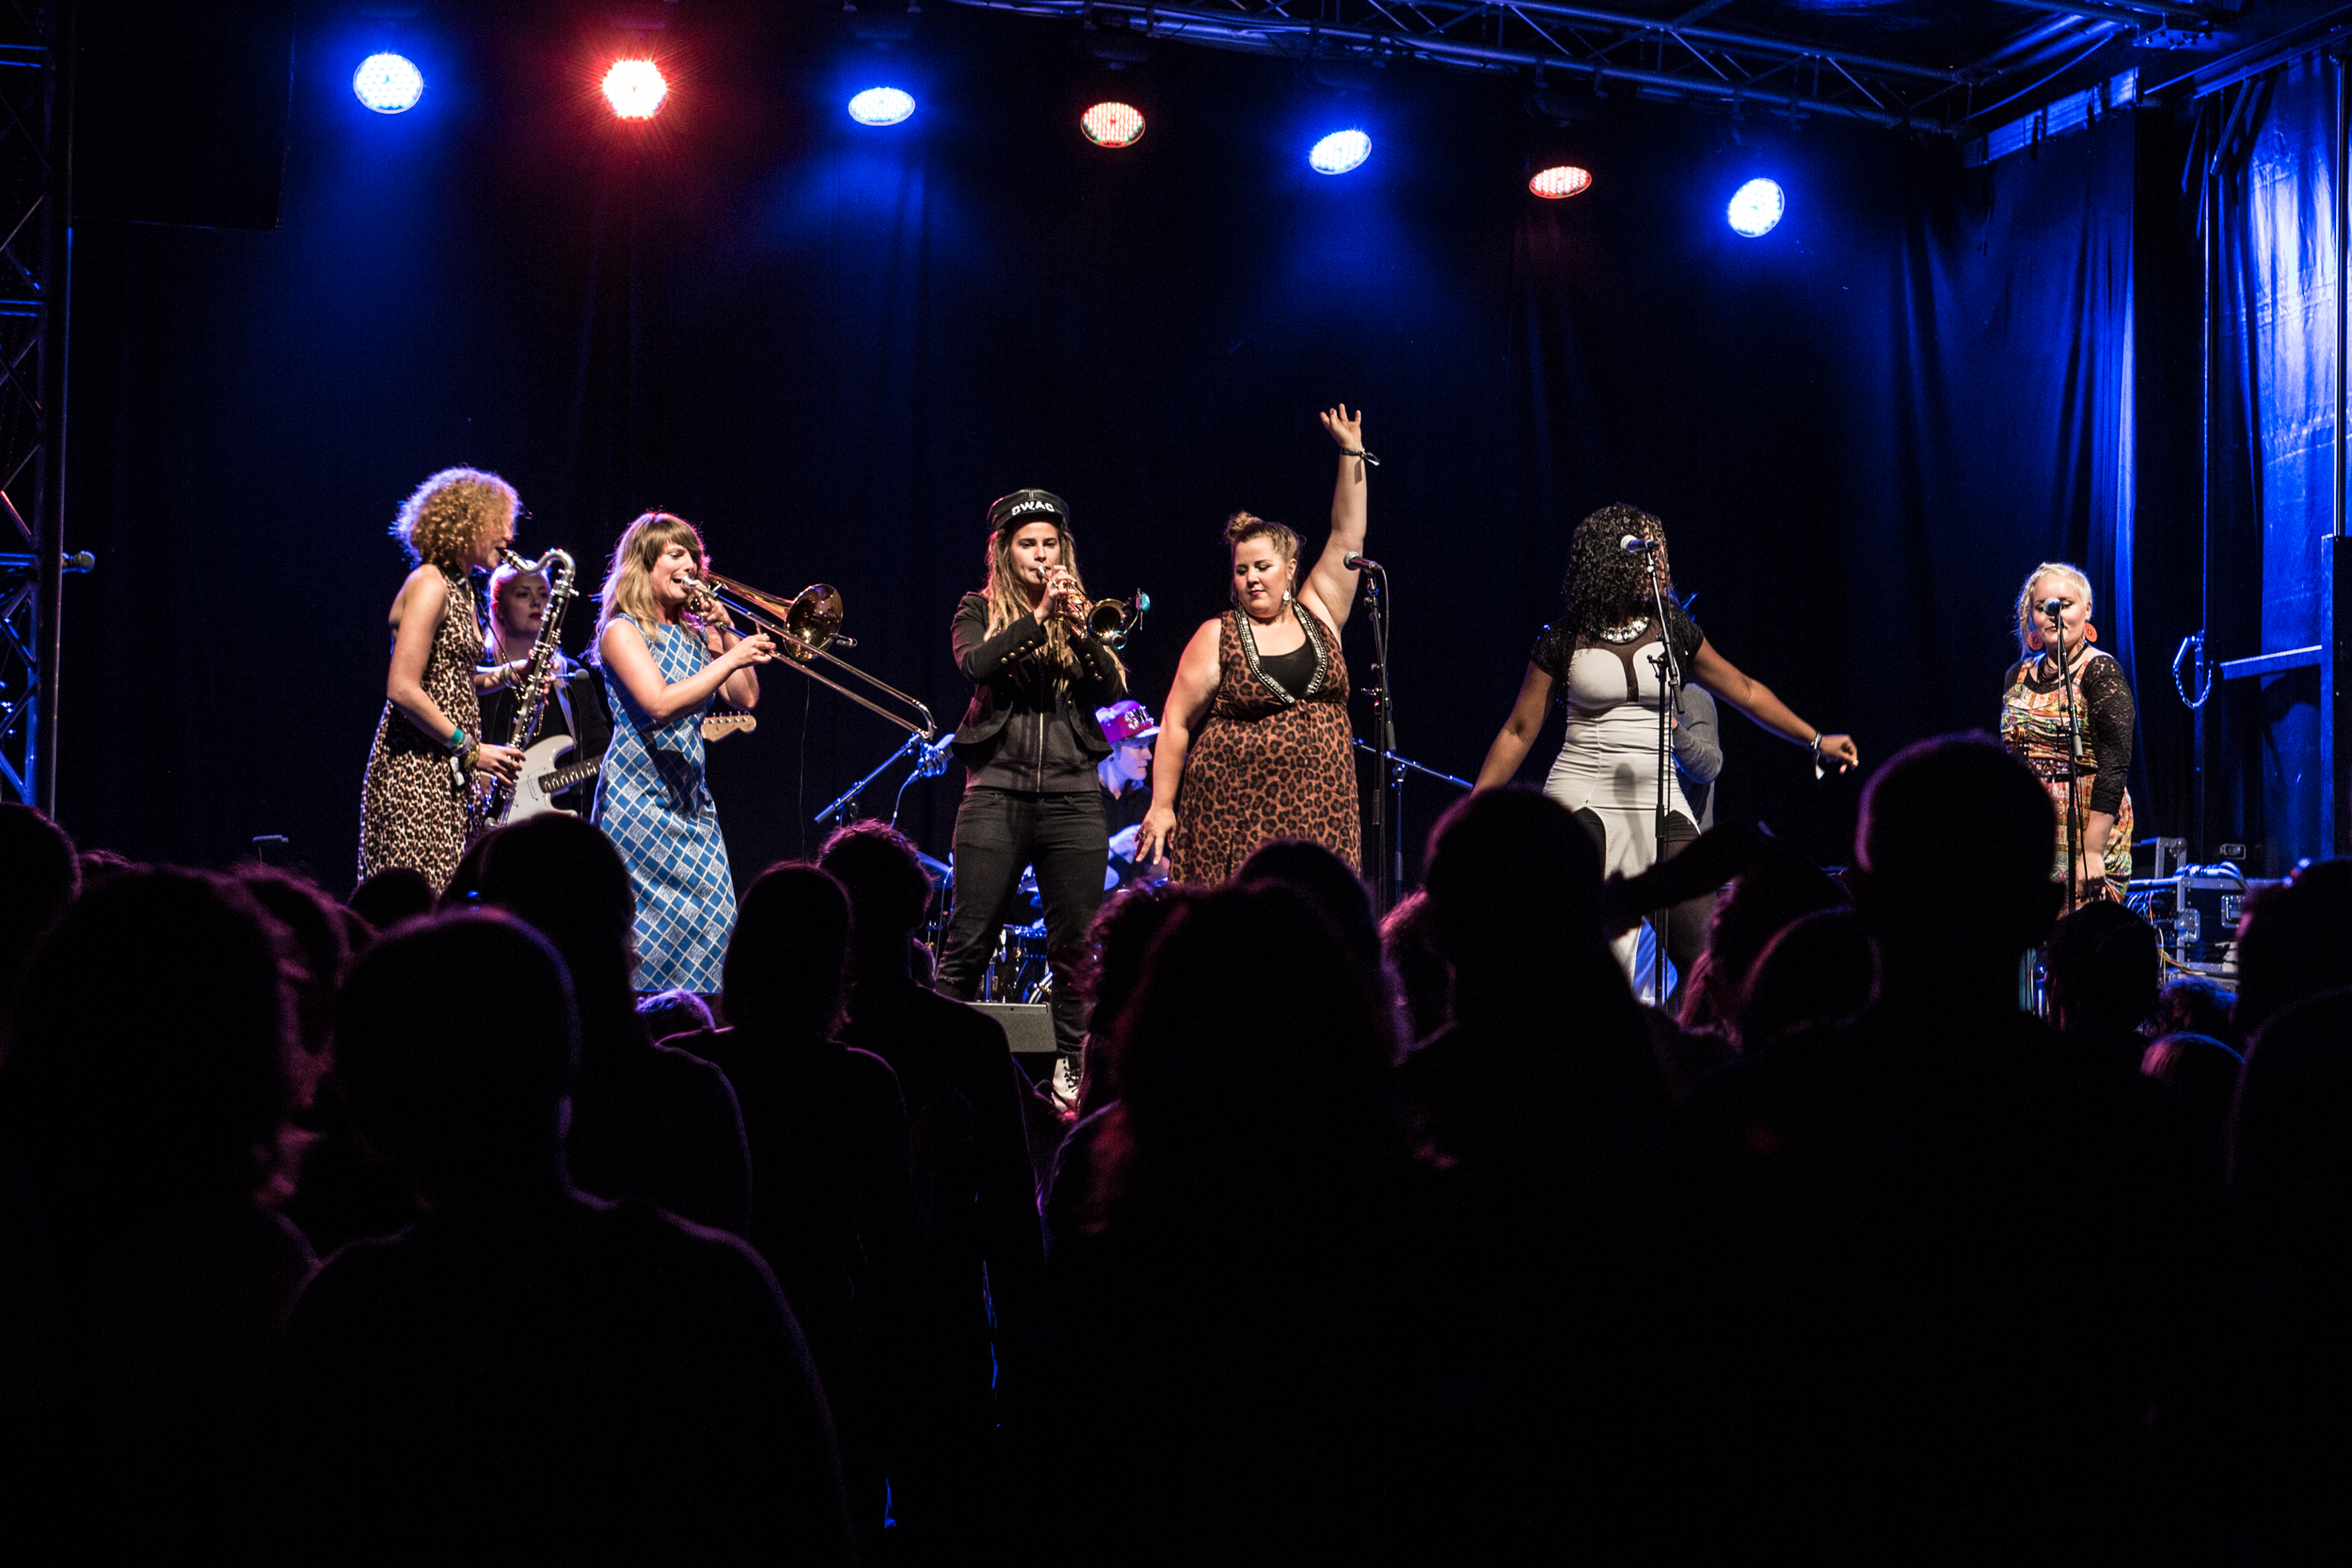 Seven female coded persons performs on a stage with audience in front of them